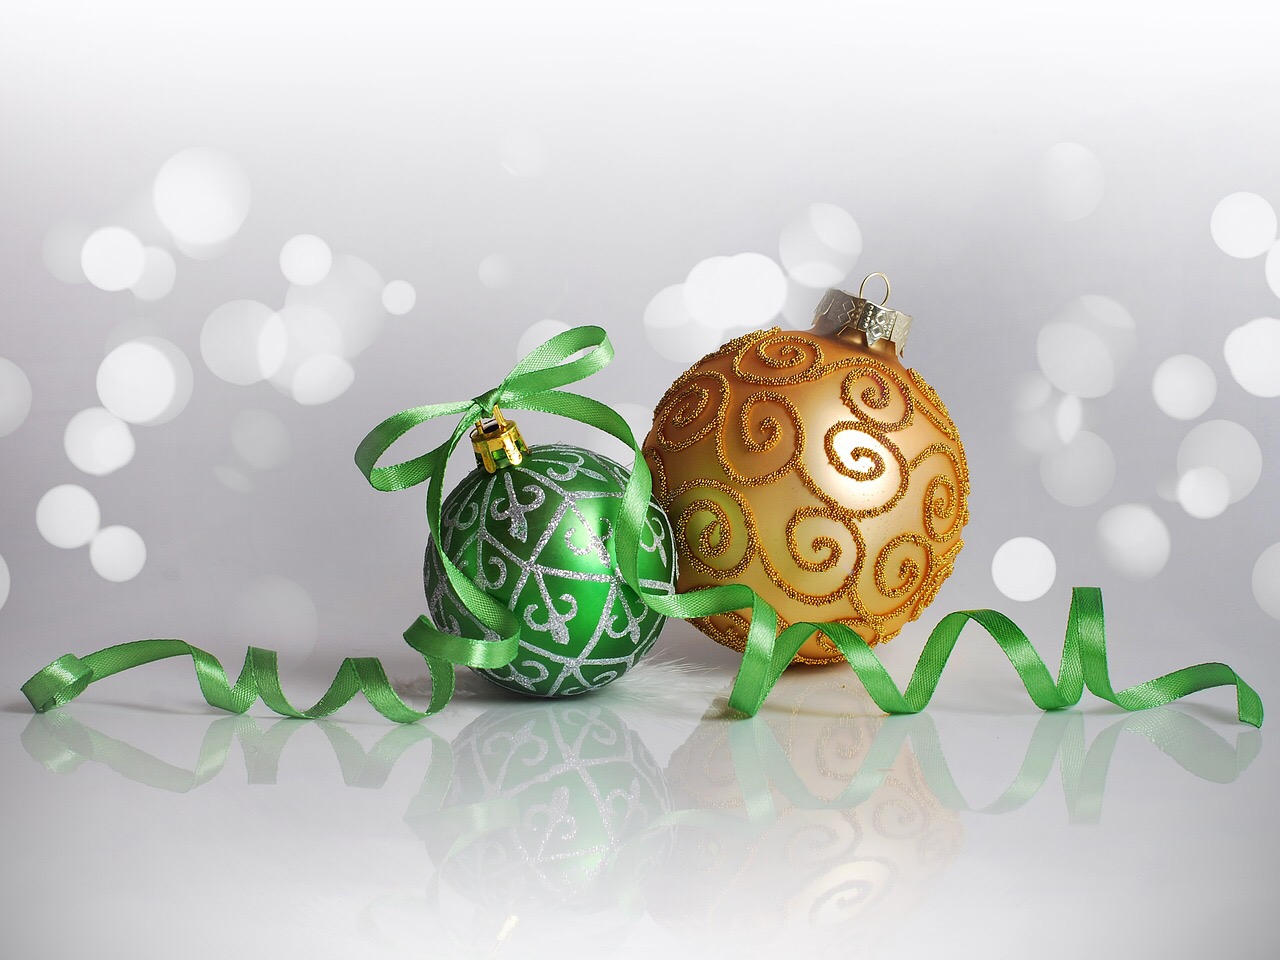 Christmas ornaments, one green and one gold. Credit: cloisy/Pixabay